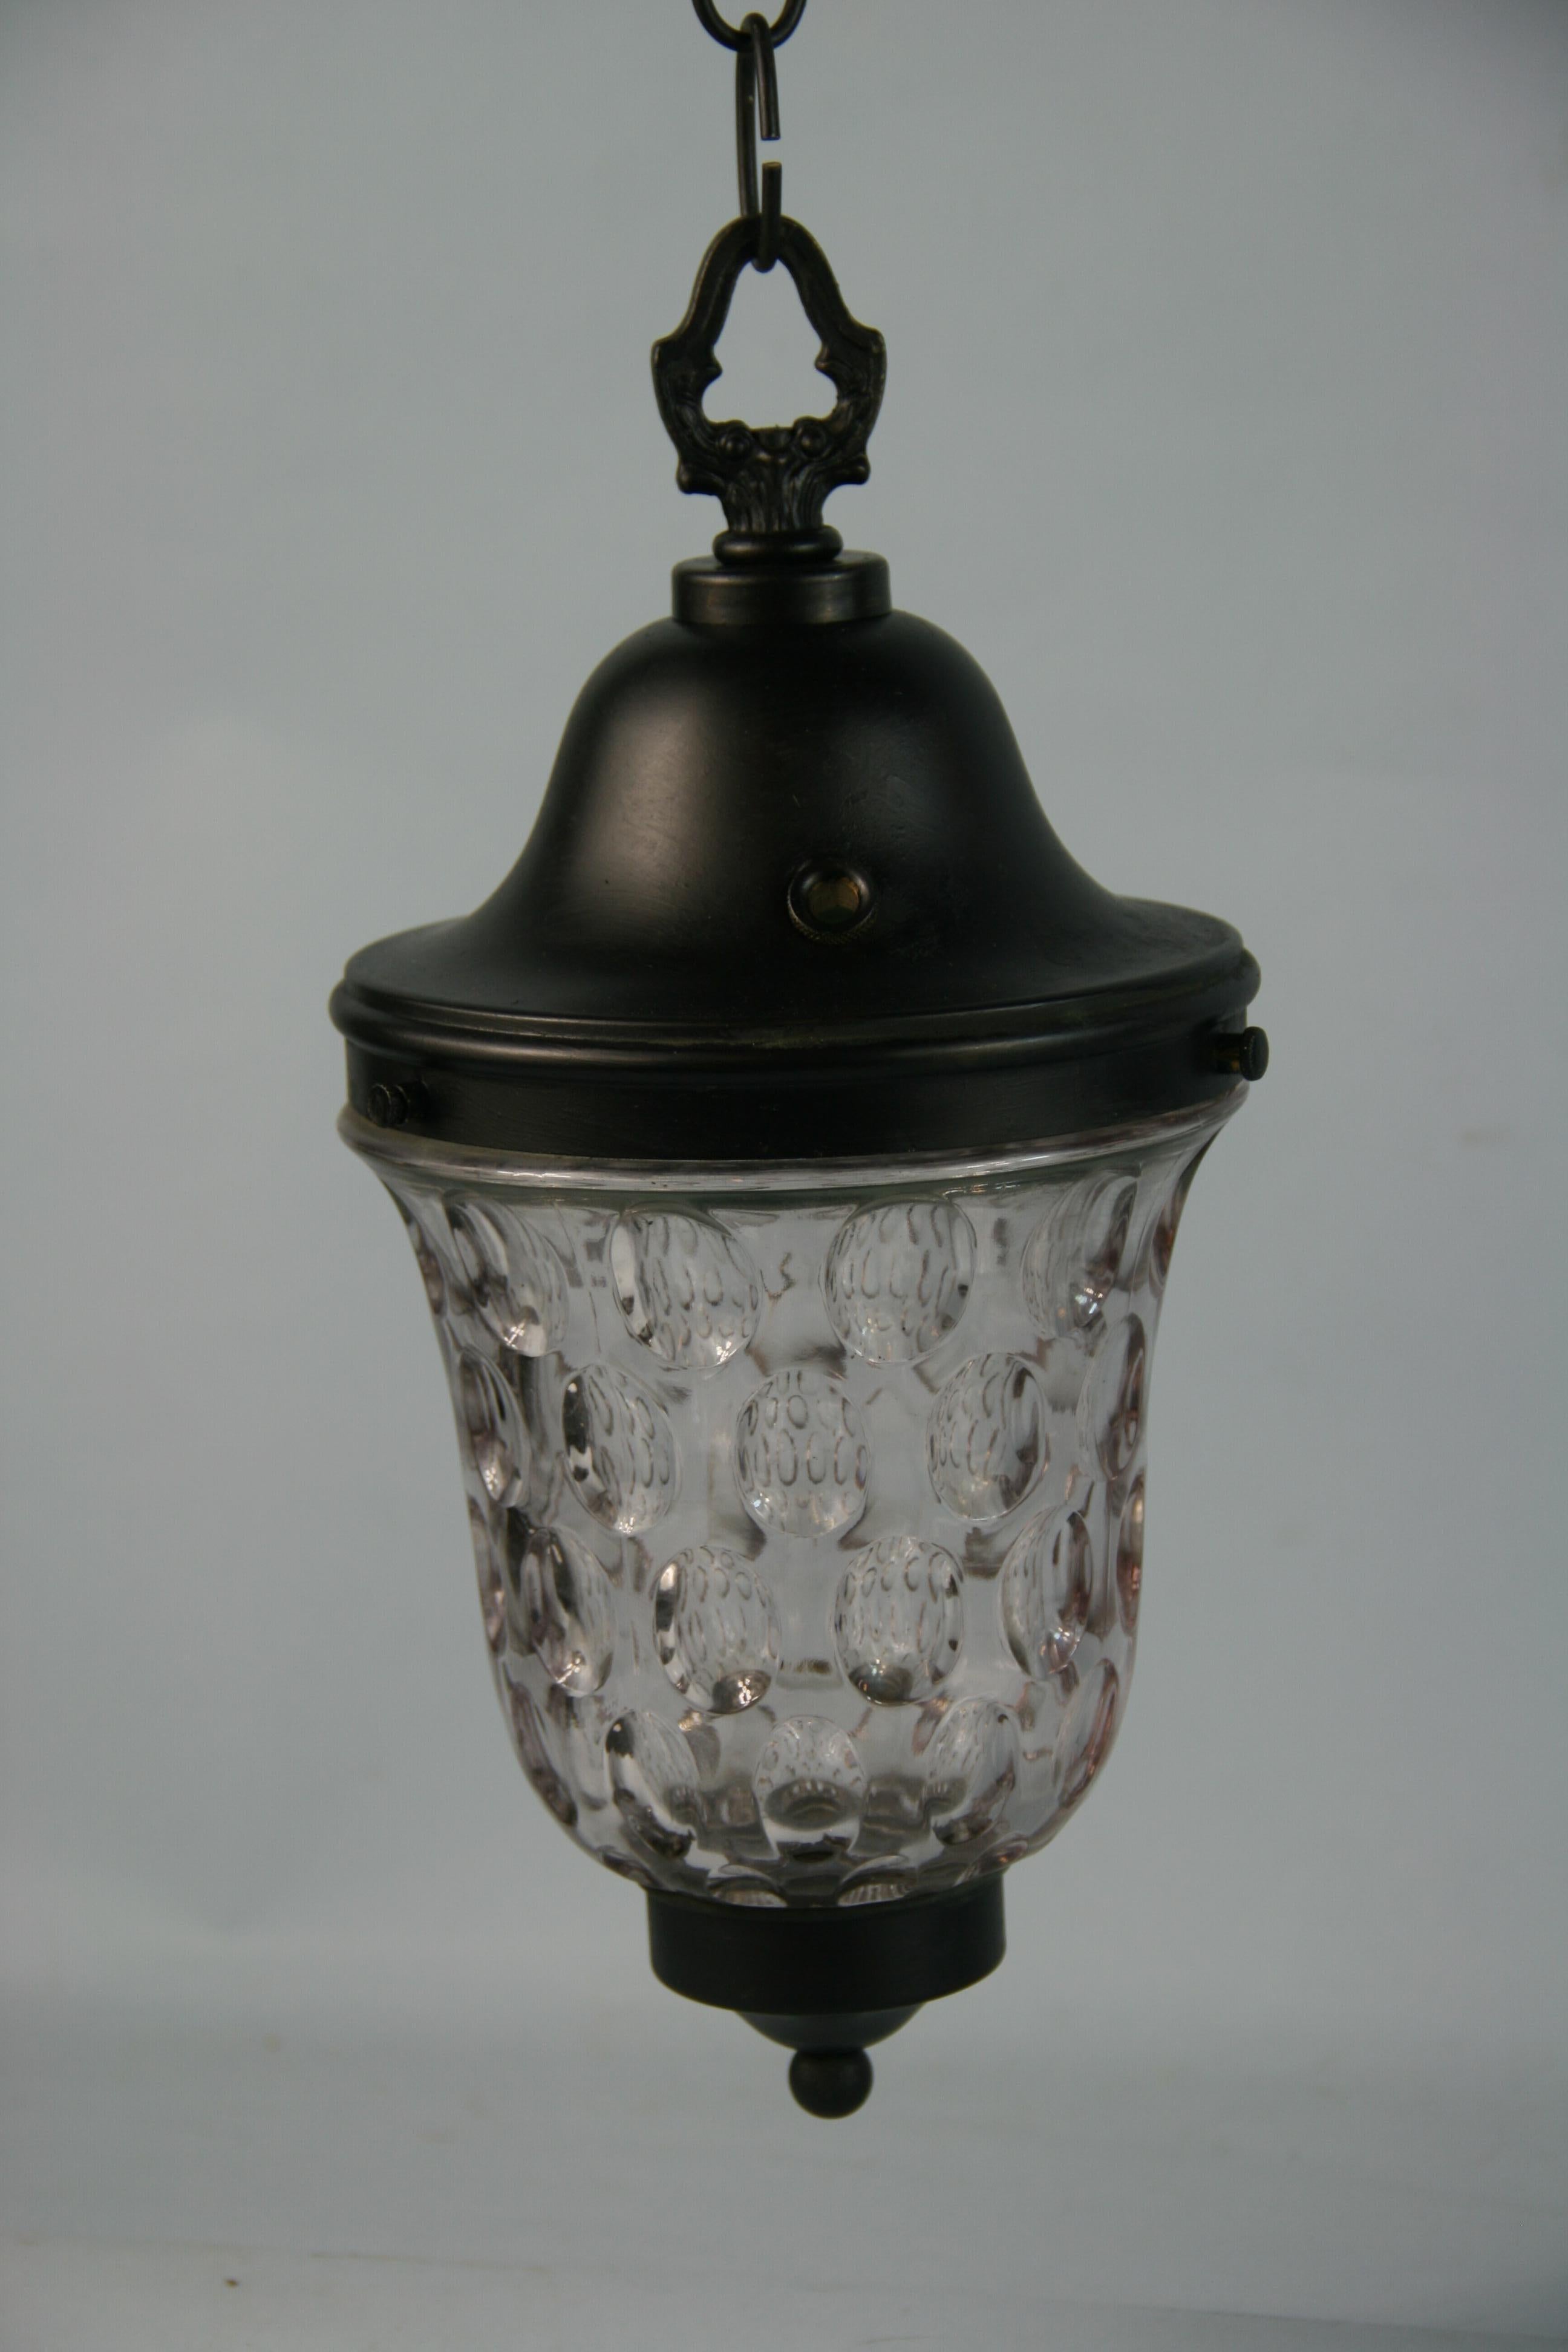 3-688 Bubble glass pendant with blackened brass hardware
Fixture dimensions 6